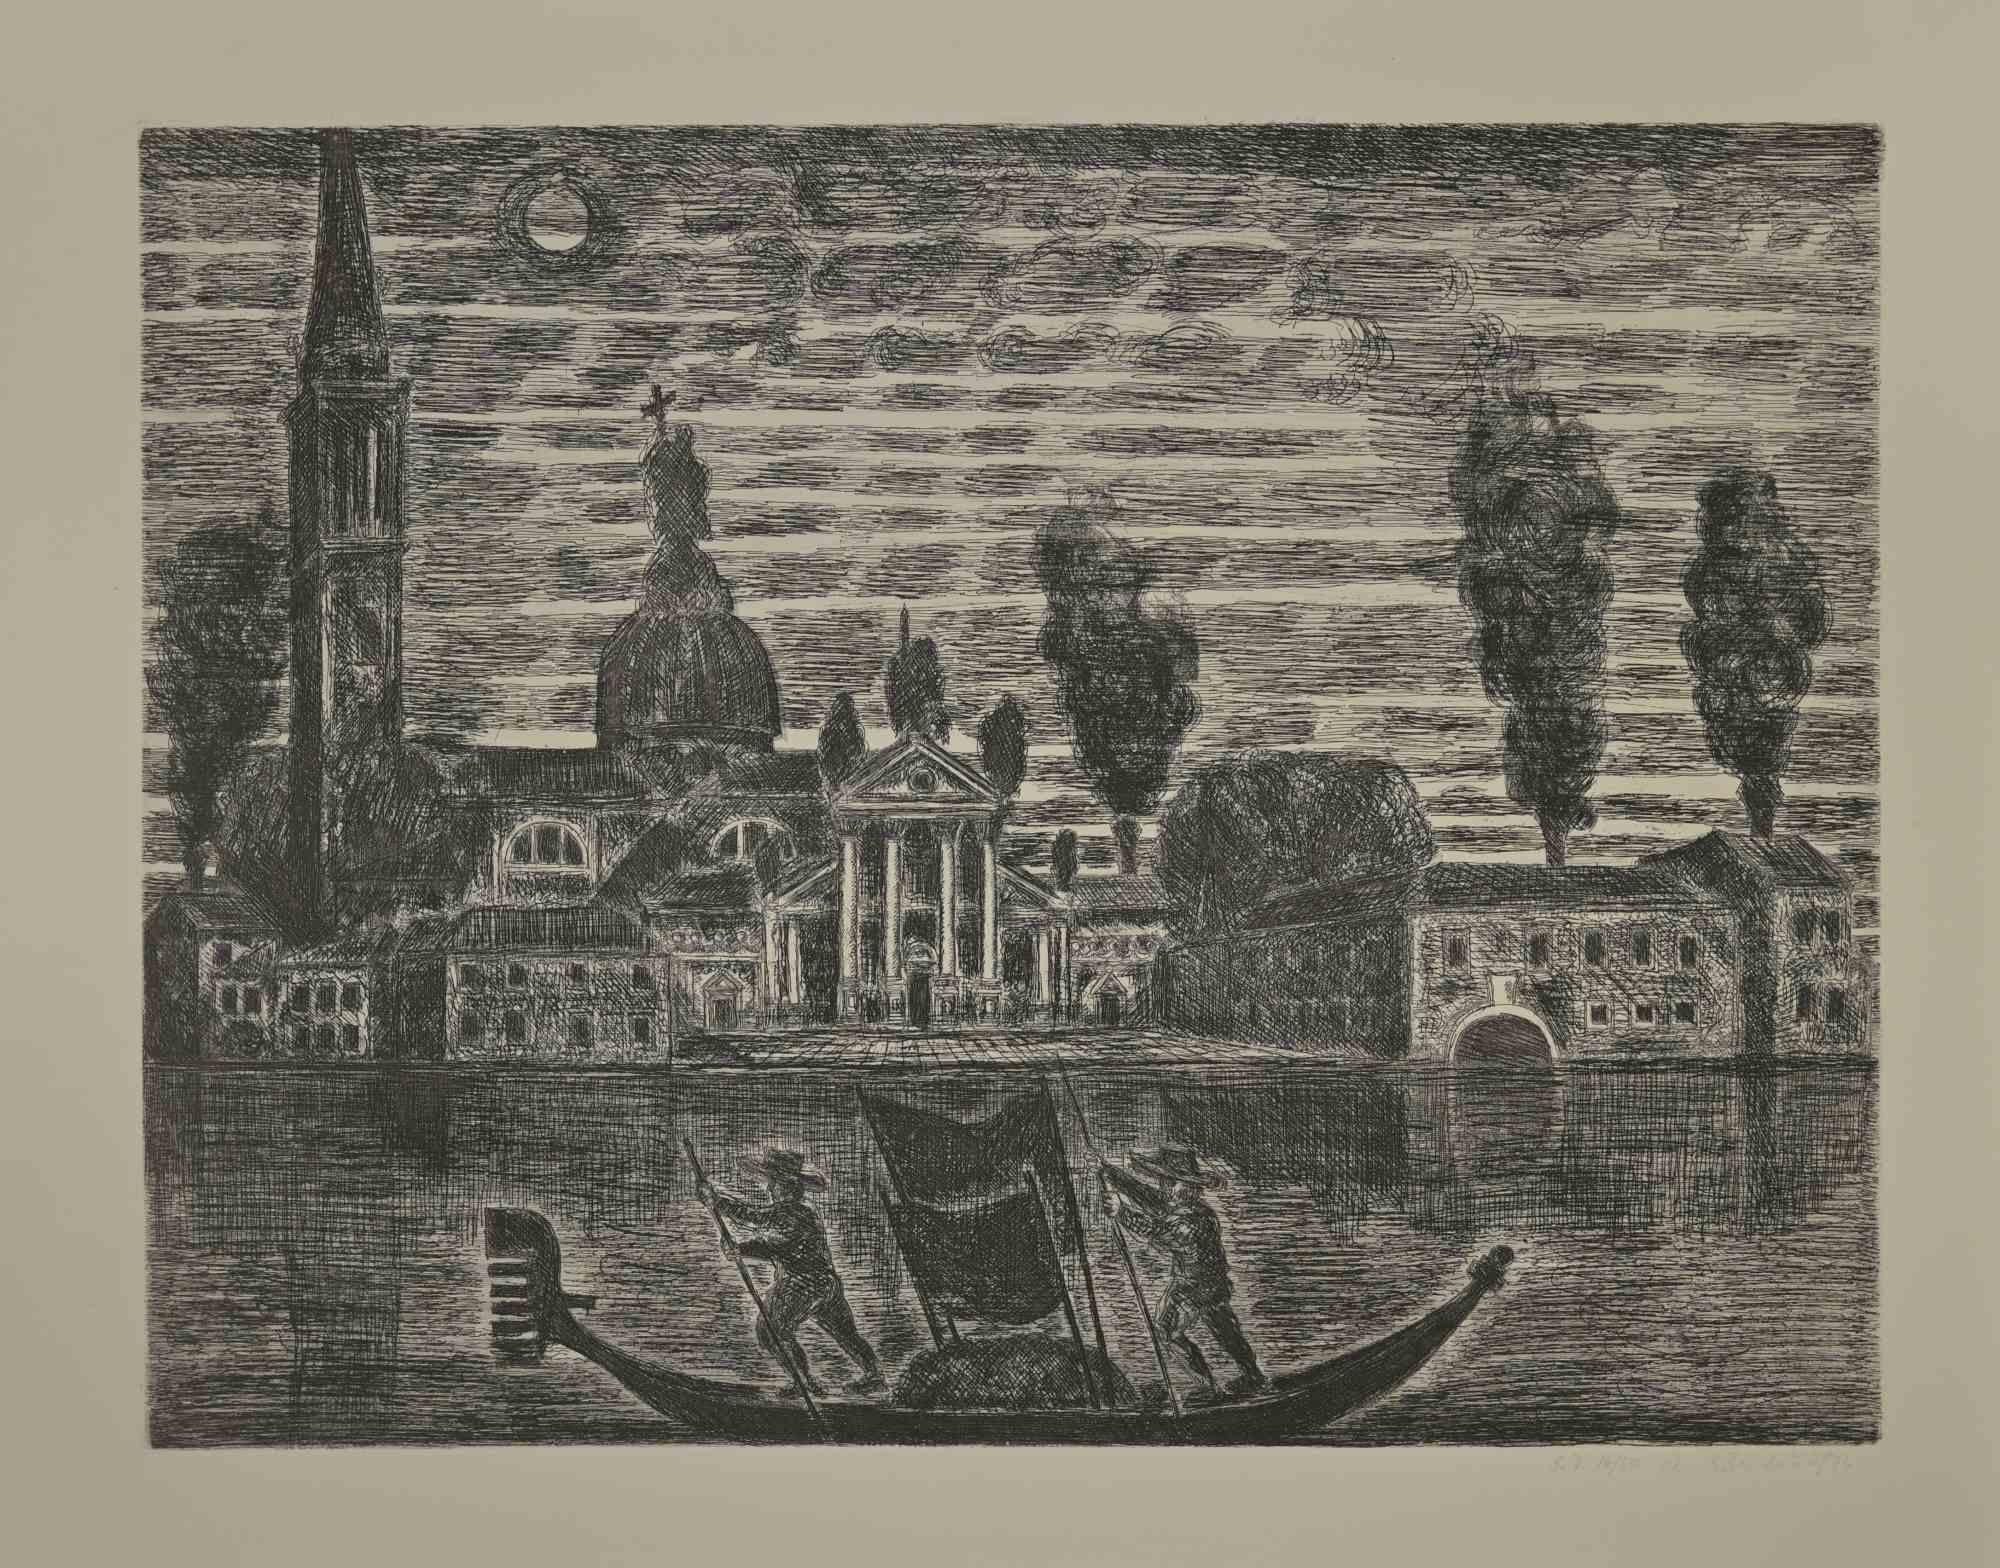 Gondoliers in Venice - Etching by Gianpaolo Berto - 1974